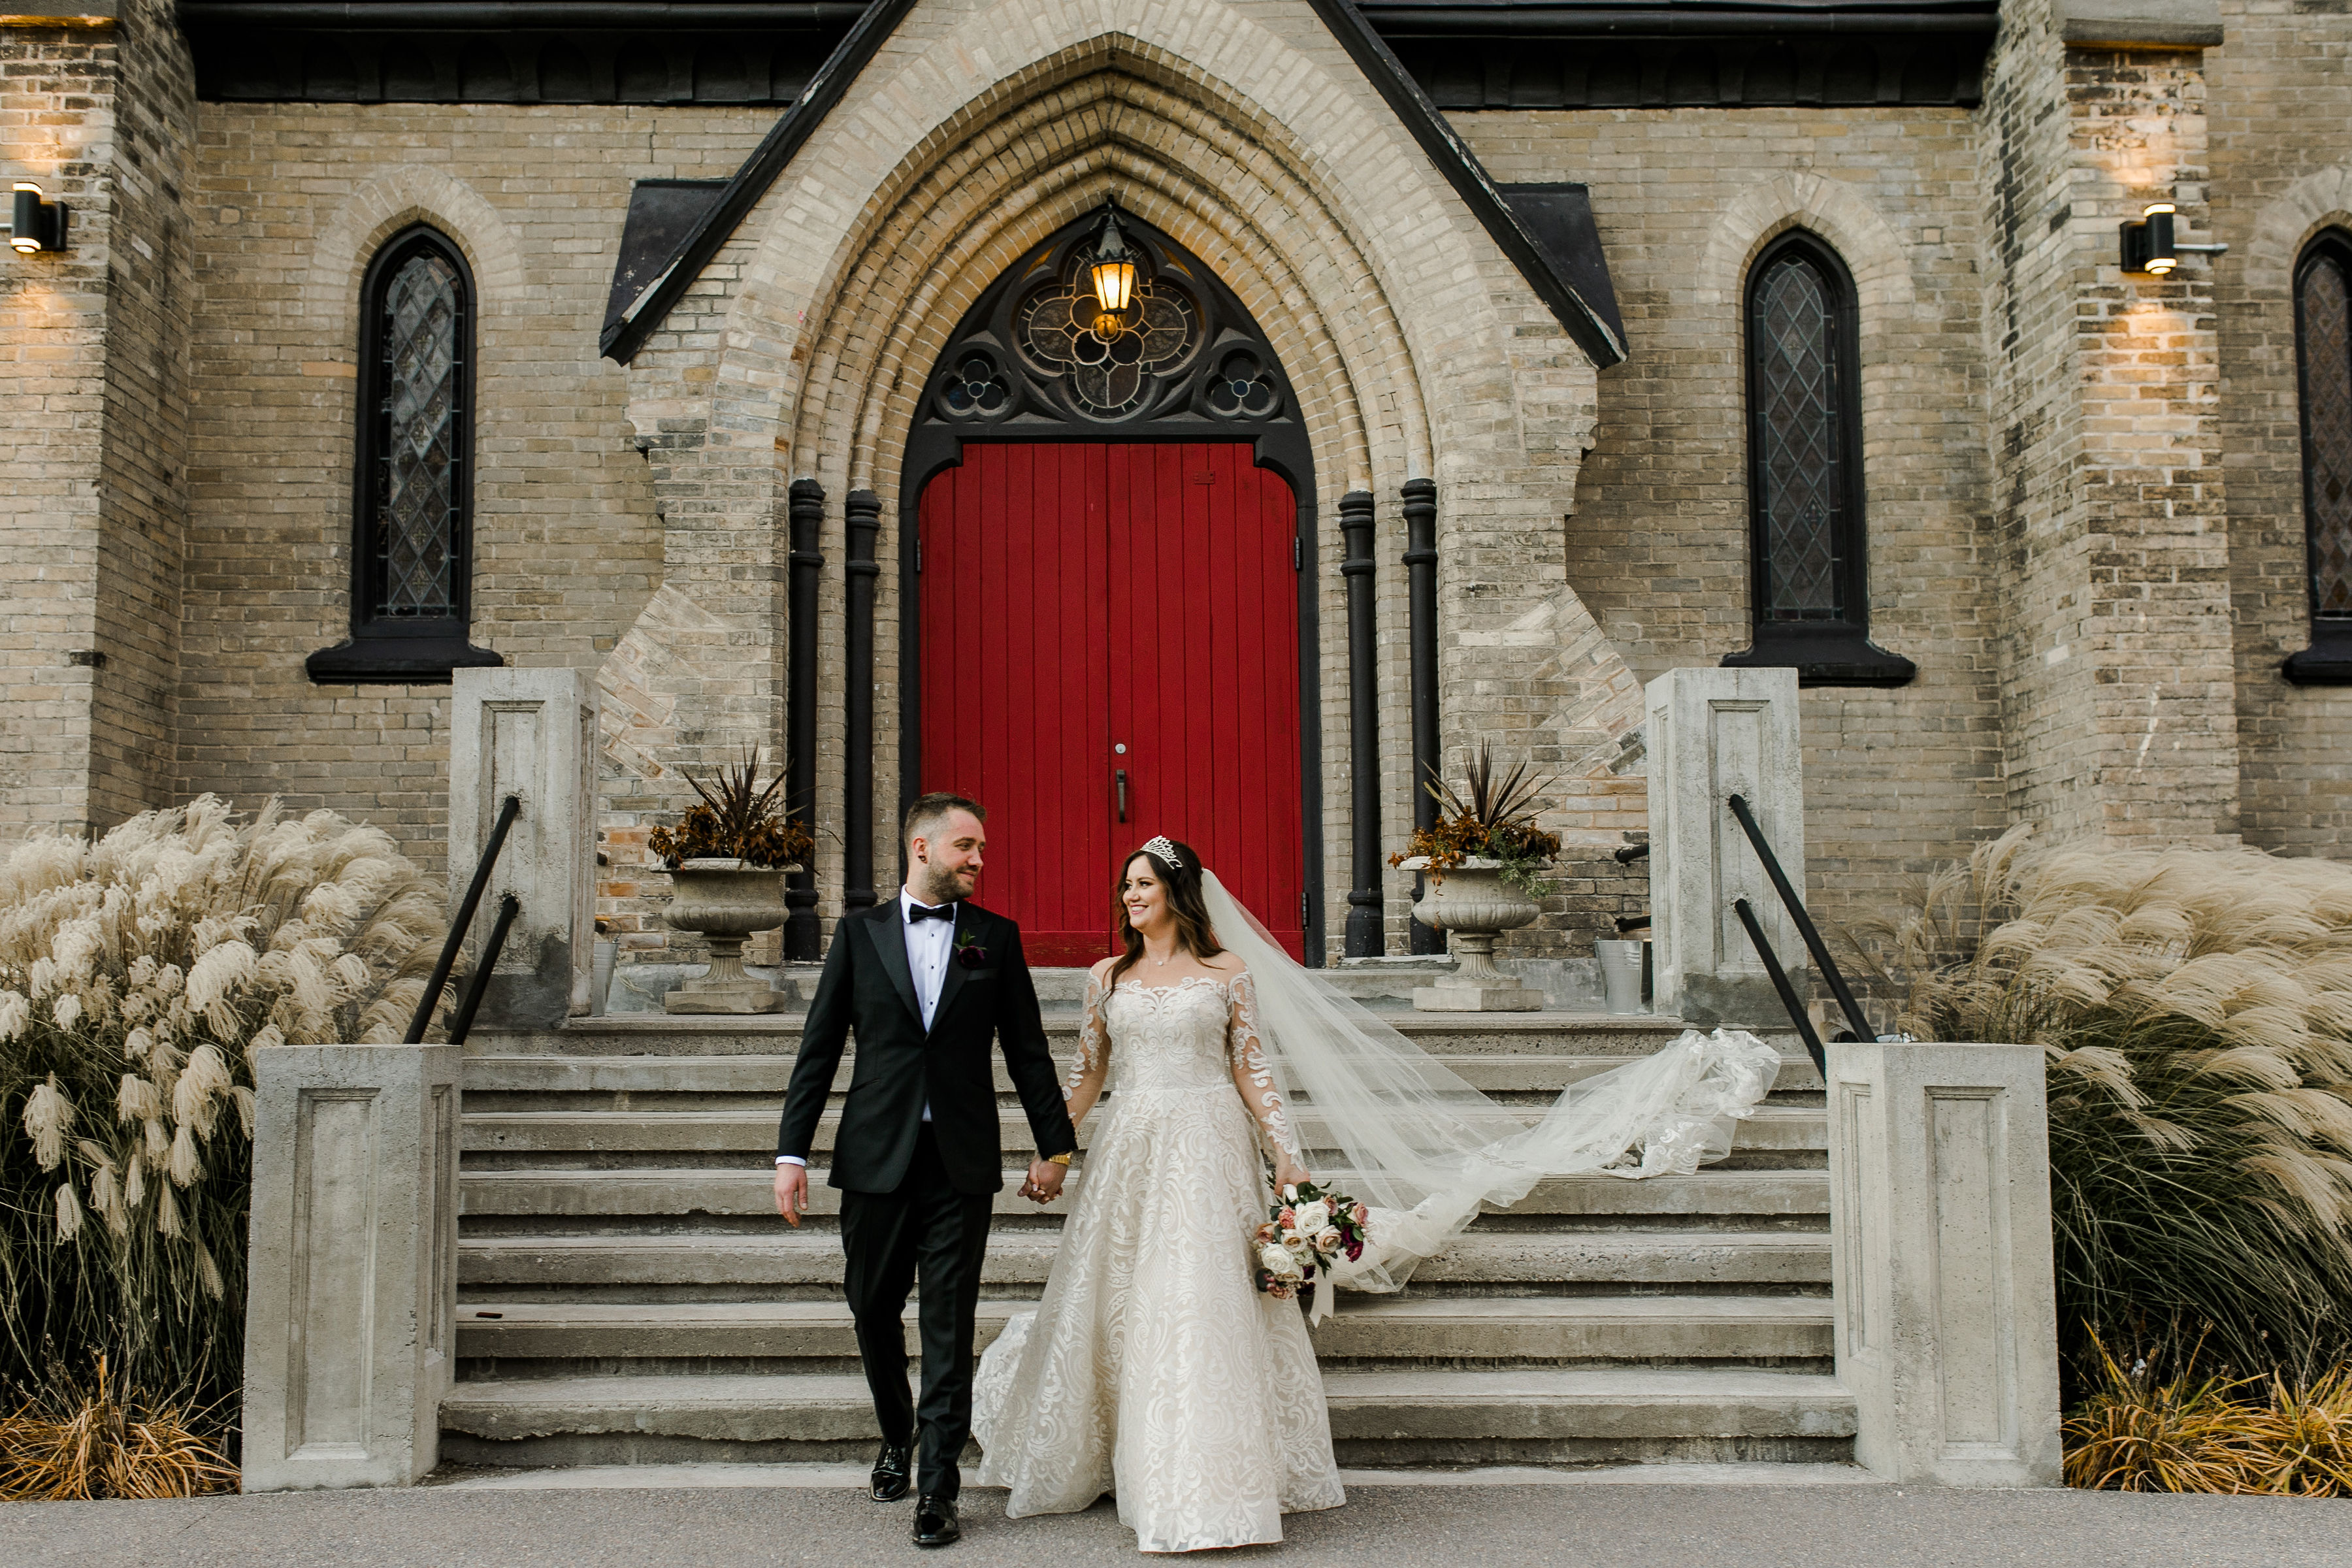 Wedding at Millbrook Cathedral 